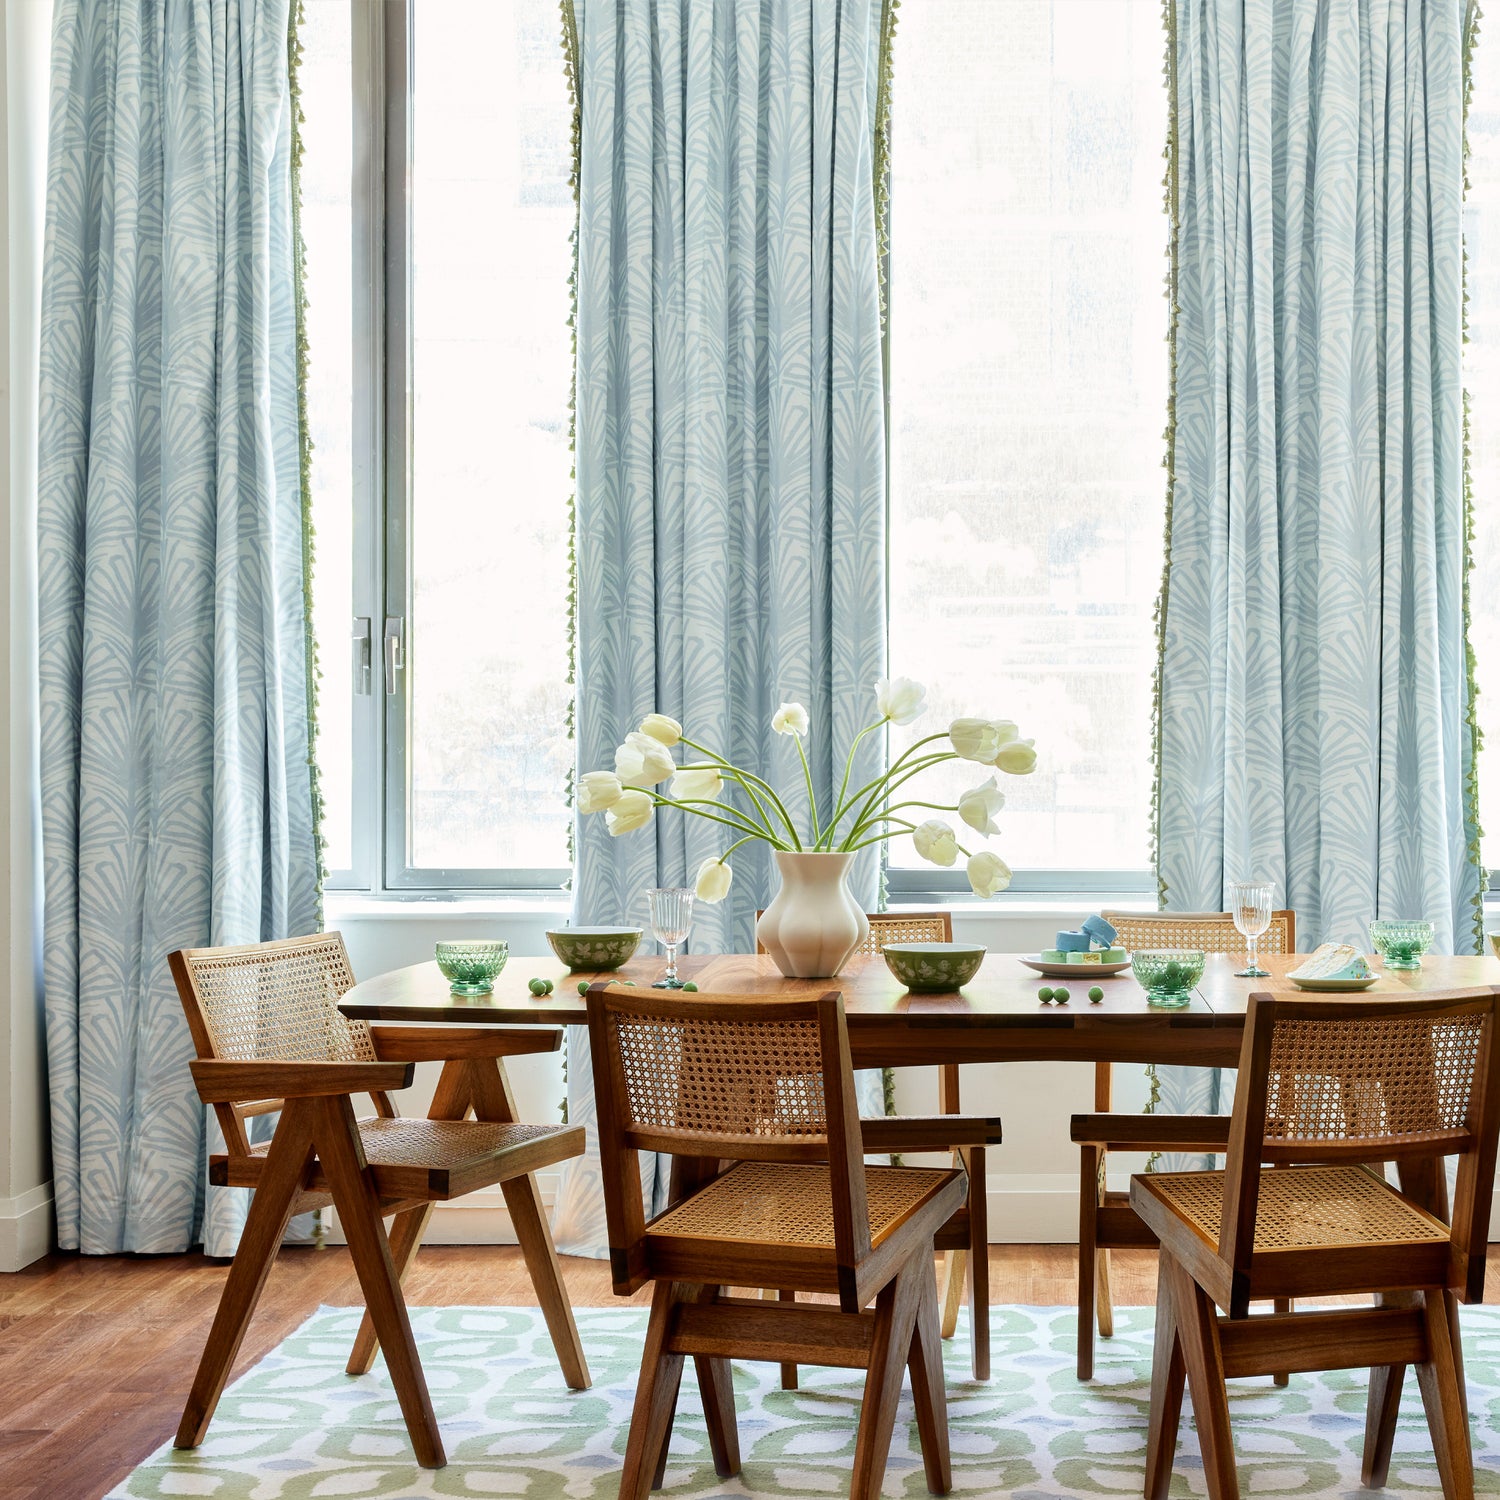 Wooden dining room table styled with white tulips in white vase in the center and Moss Green Geometric Printed Rug below in front of Sky Blue Palm Printed Curtains